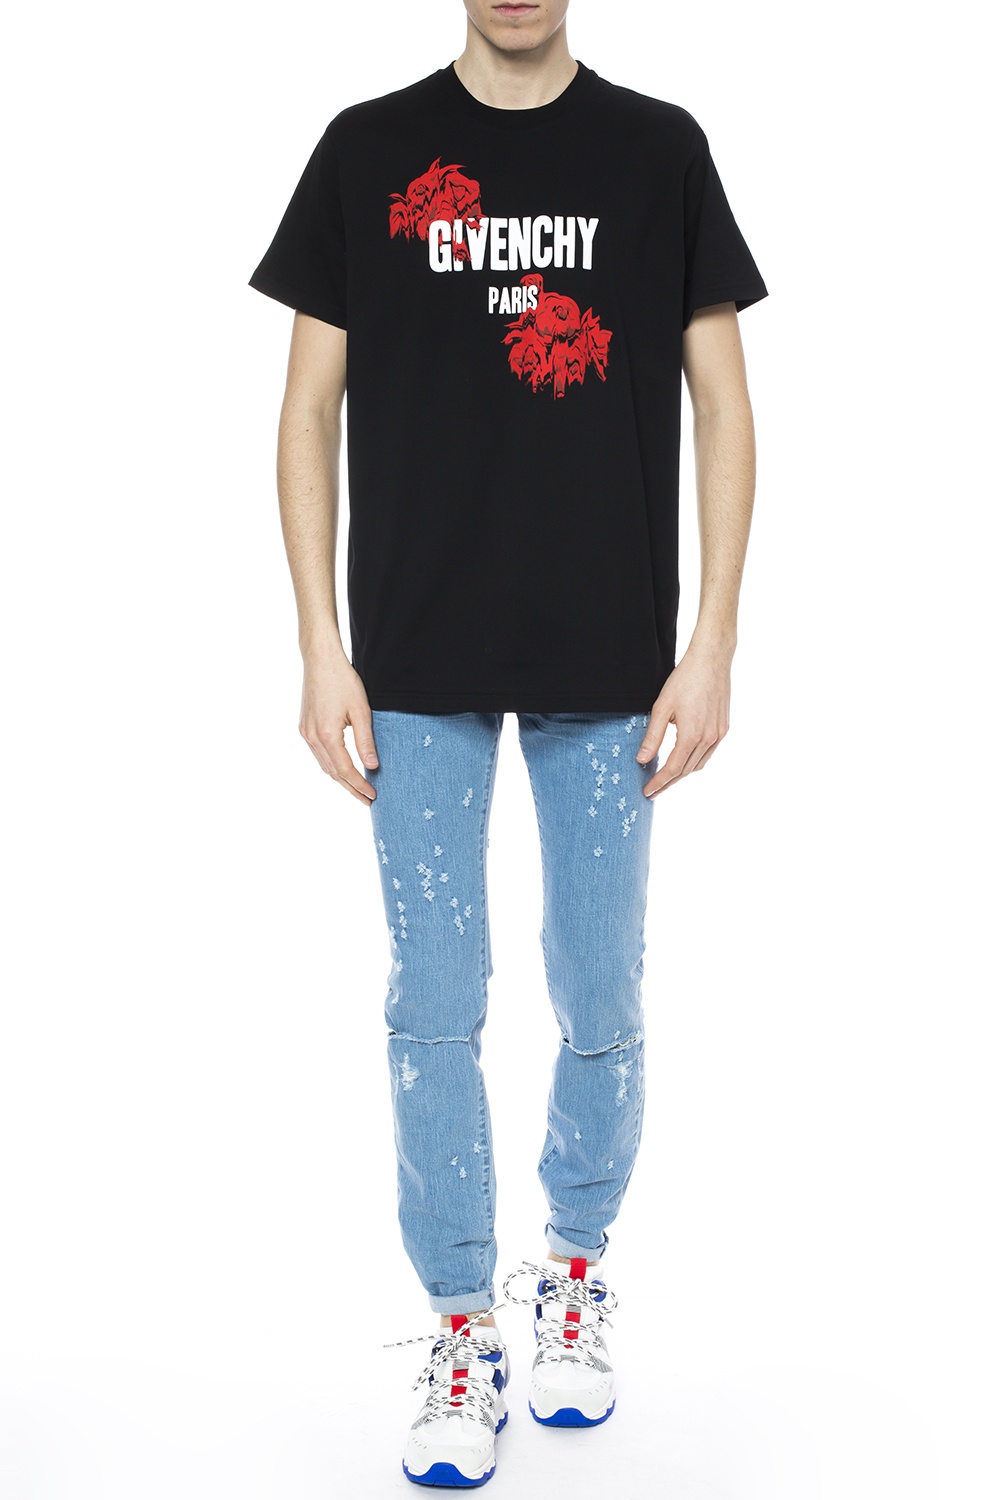 givenchy distressed jeans